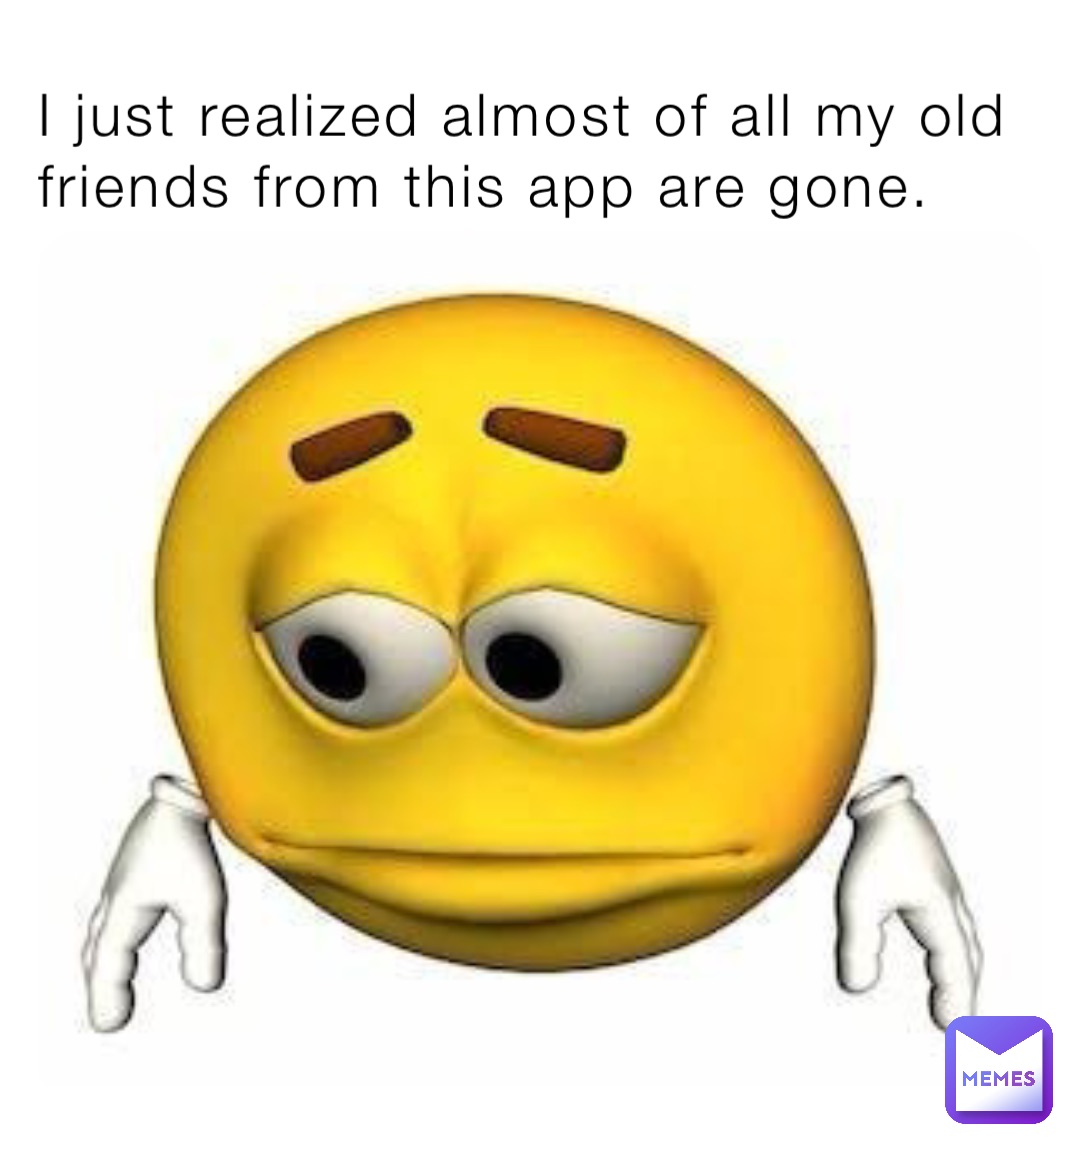 I just realized almost of all my old friends from this app are gone.